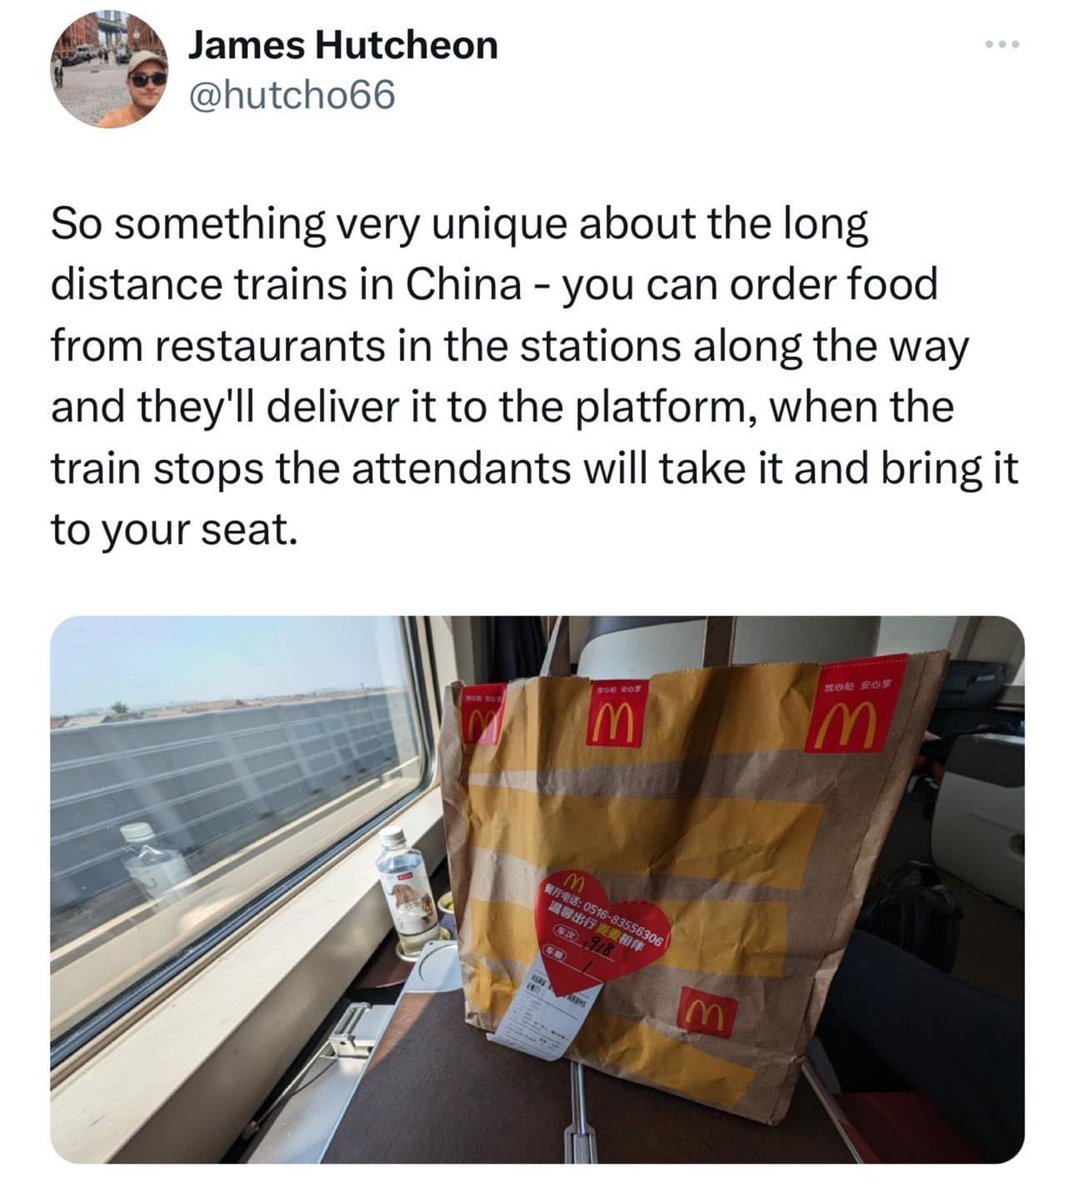 There are large termini where this would work in the UK - with enhanced staffing. Additionally, if this was a service delivered by the #train operator, it could be built in as an additional revenue stream, & could even highlight local independent businesses as an ordering option.